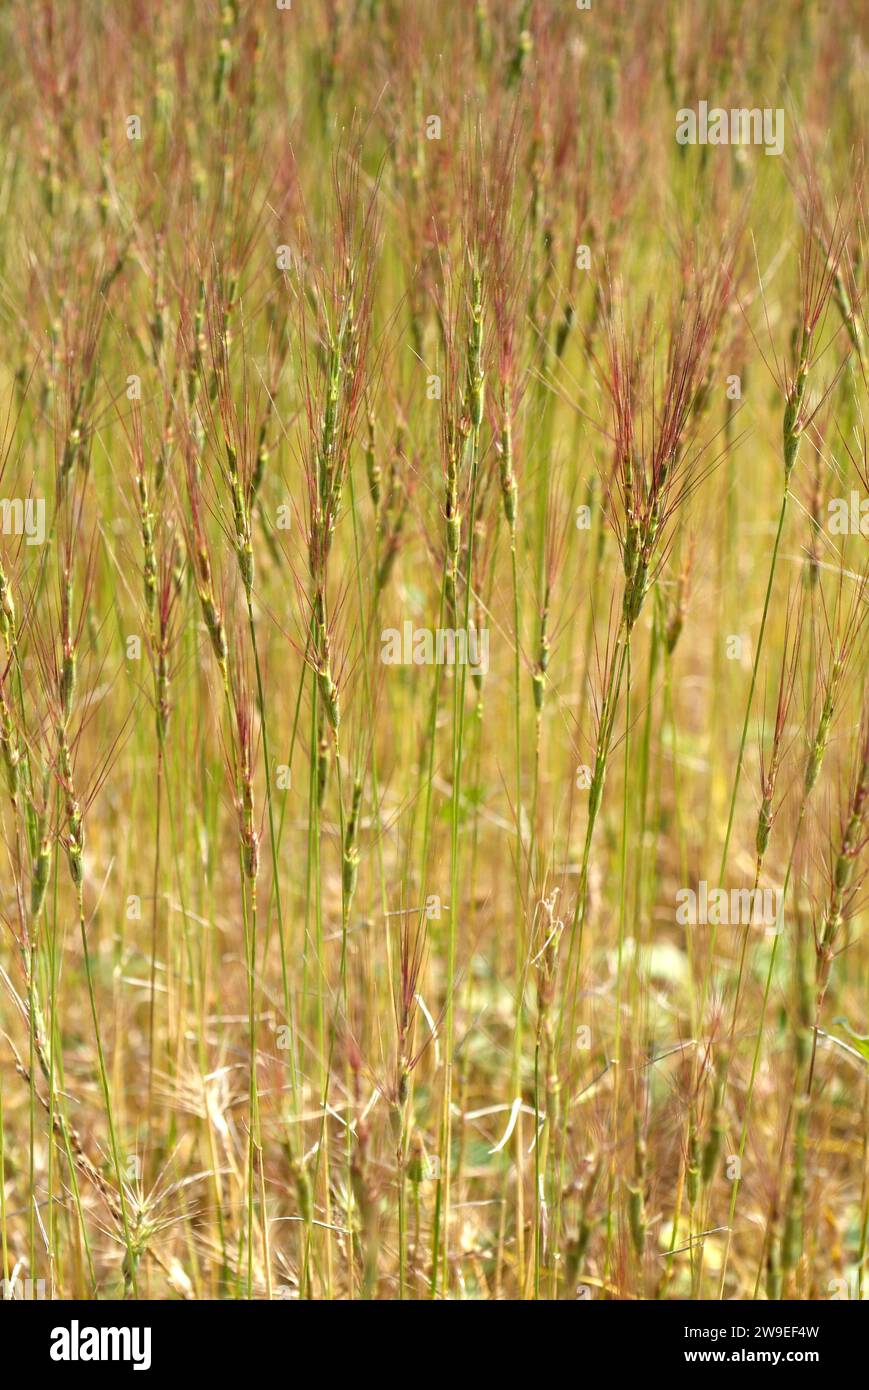 Jointed goatgrass (Aegilops cylindrica) is an annual herb native to south Europe and Central Asia but introduced in others regions. Stock Photo